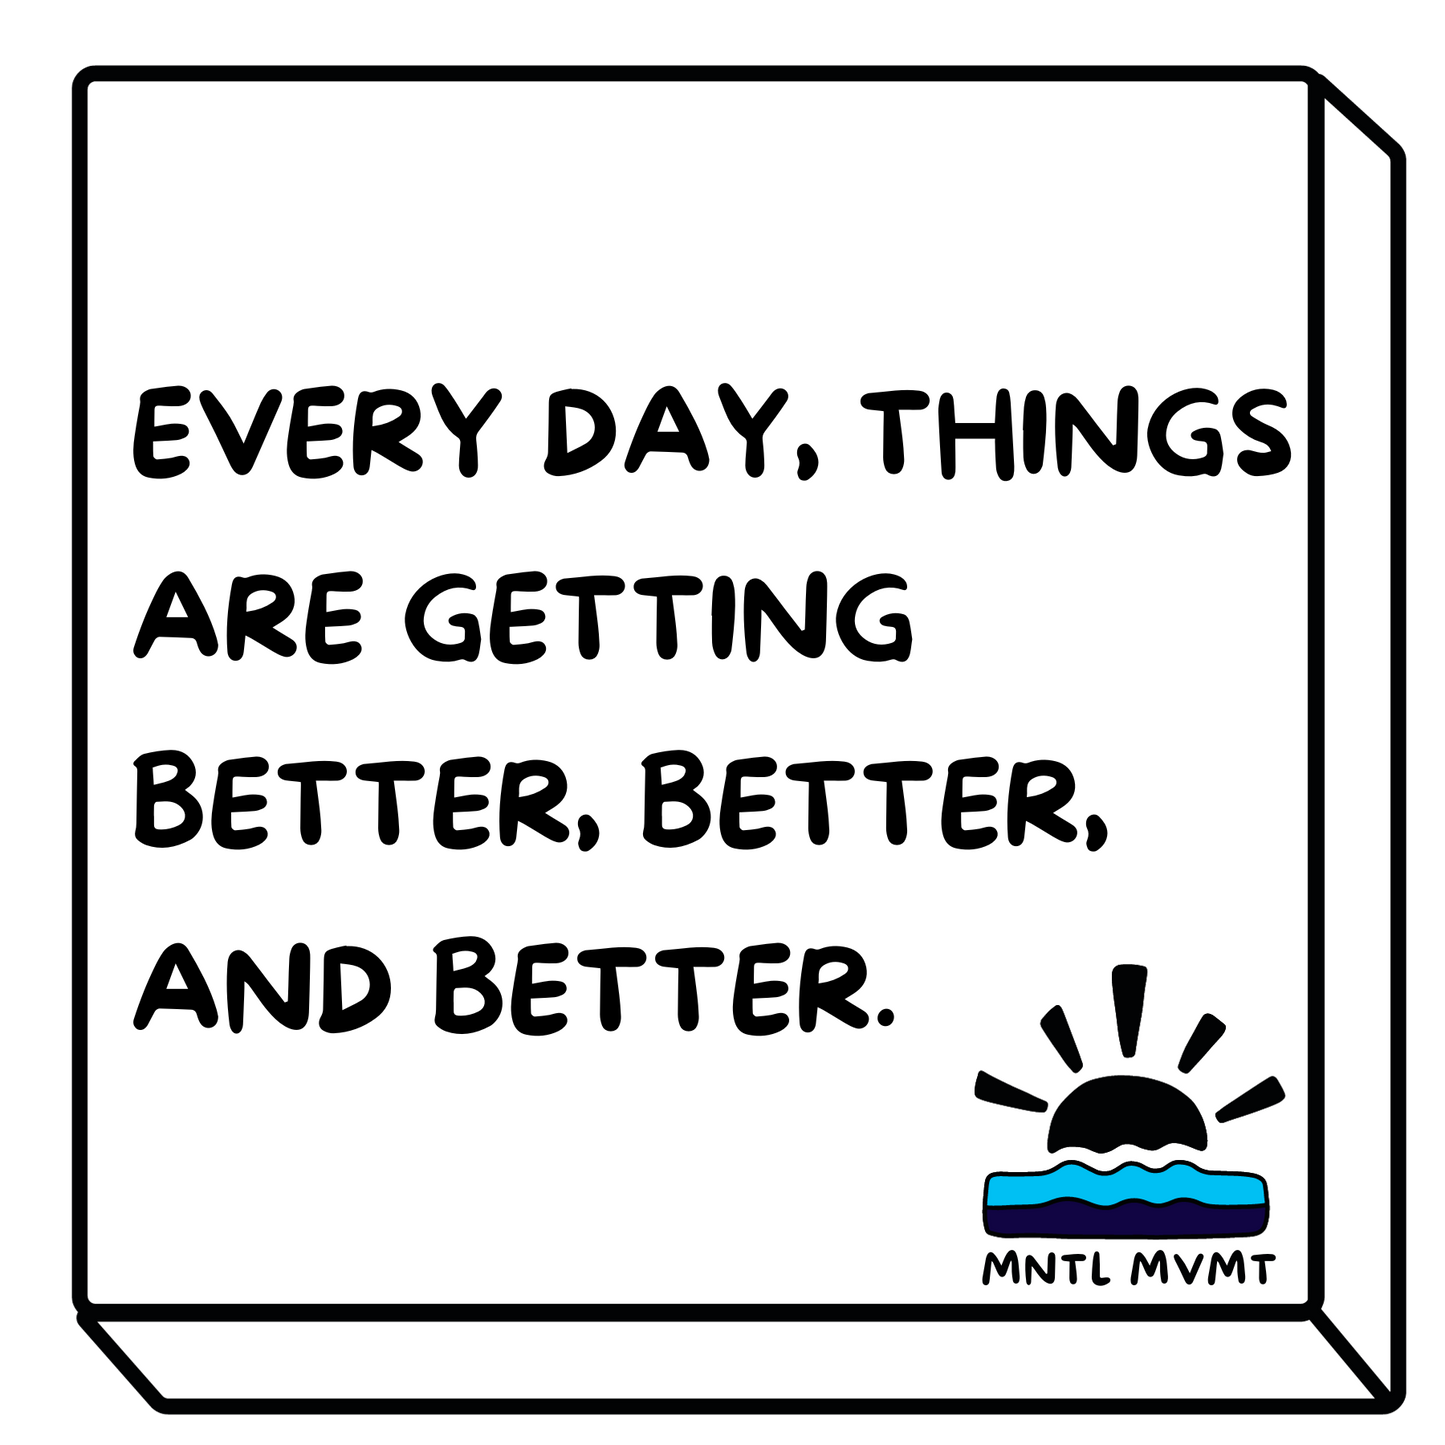 EVERY DAY THINGS ARE GETTING BETTER, BETTER, AND BETTER.